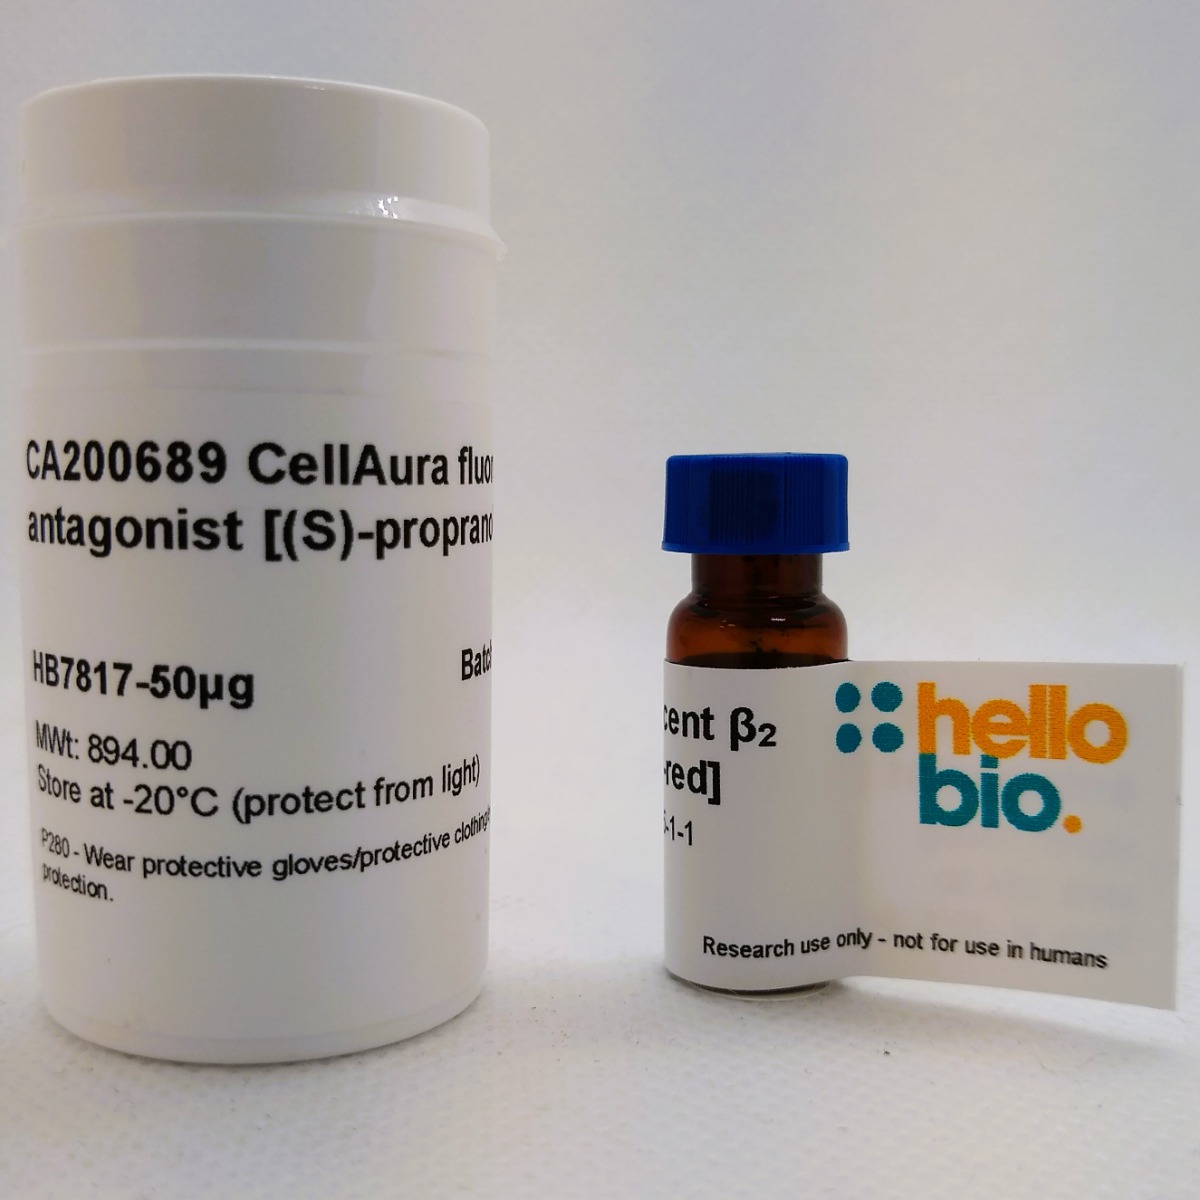 CellAura fluorescent β2 antagonist [(S)-propranolol-red] product vial image | Hello Bio